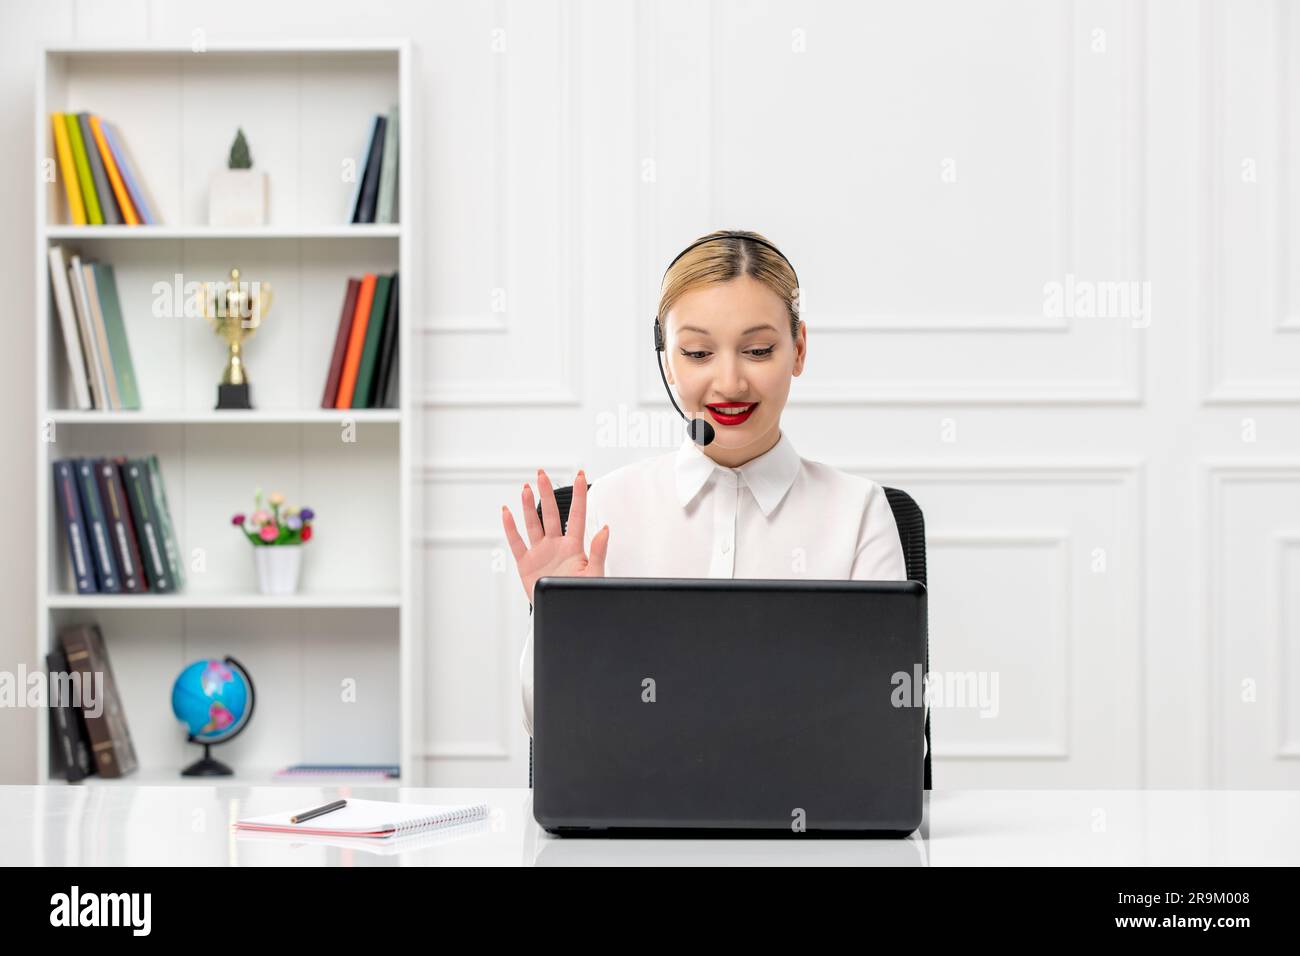 customer service cute woman in white shirt with headset and computer saying hello Stock Photo